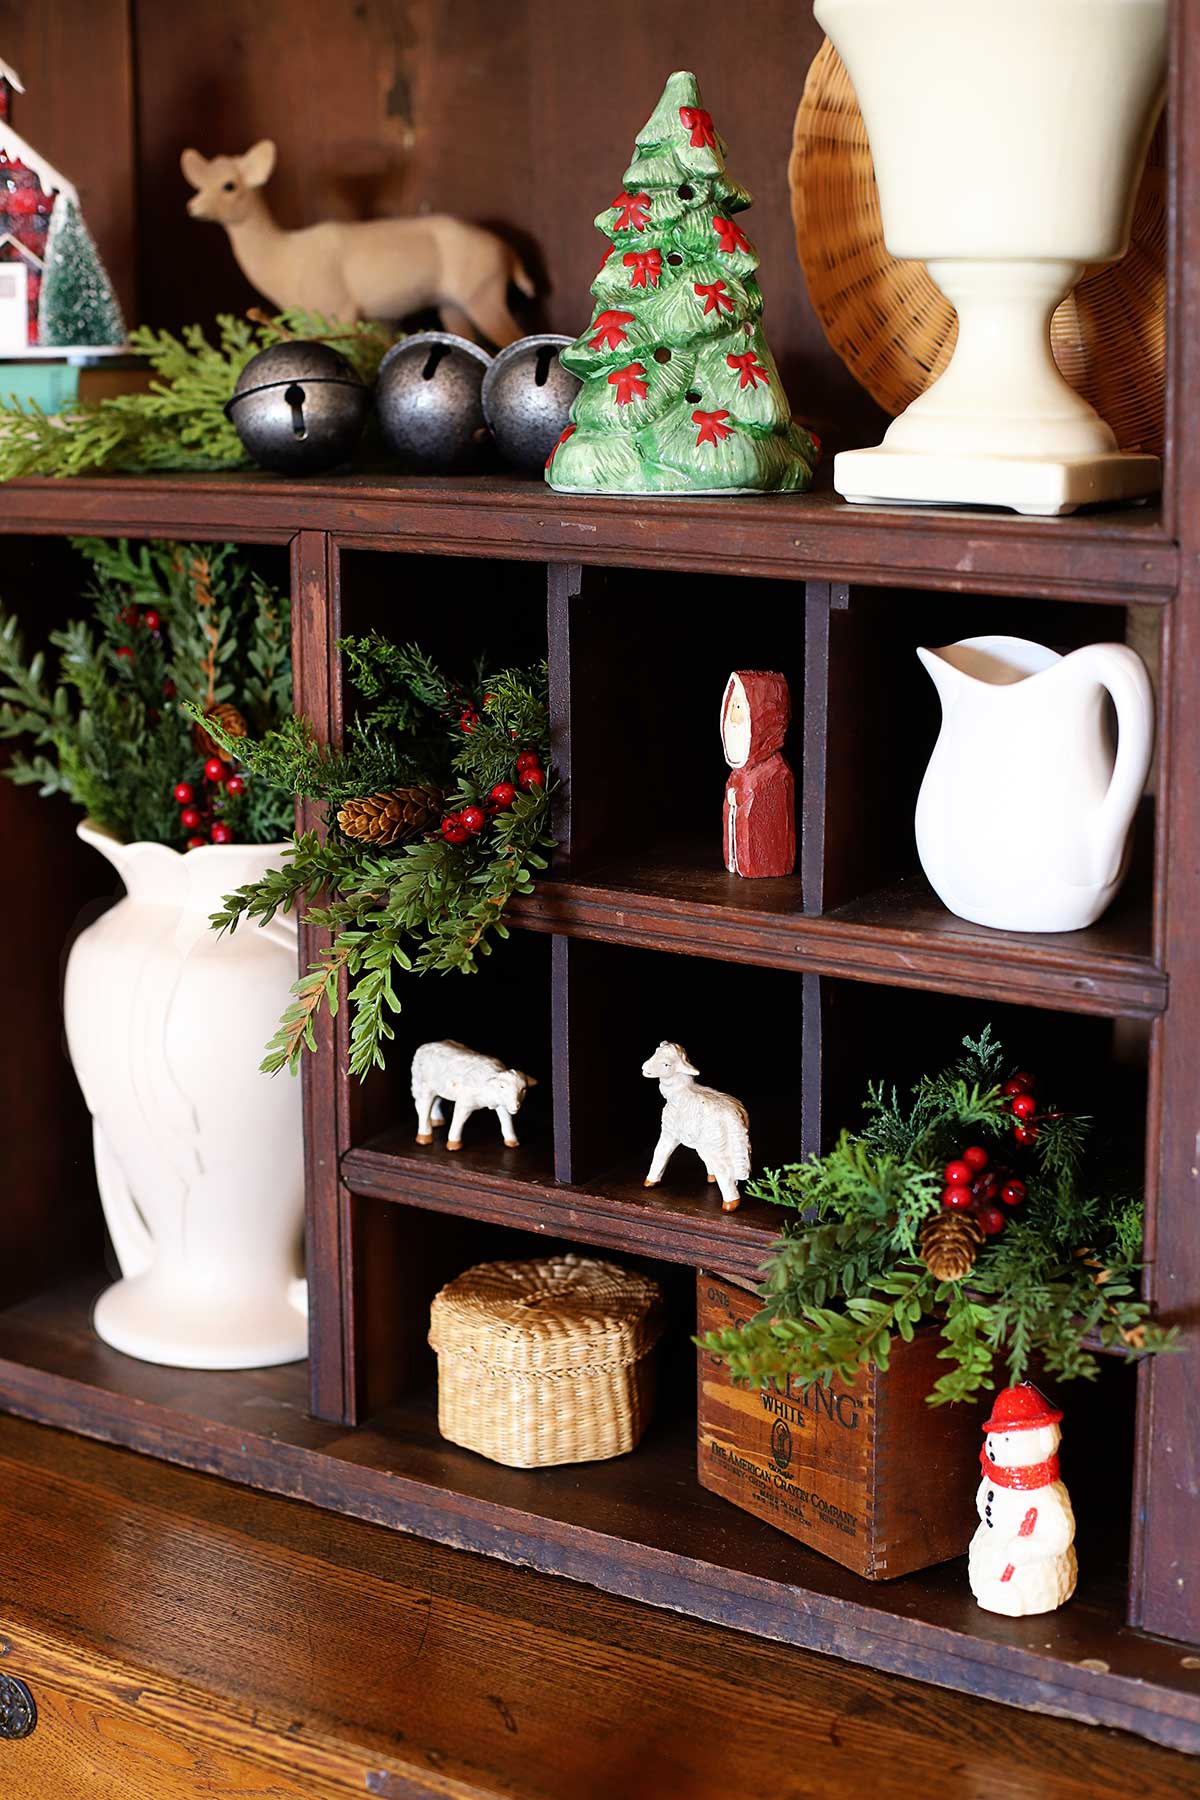 decorating the hutch for Christmas